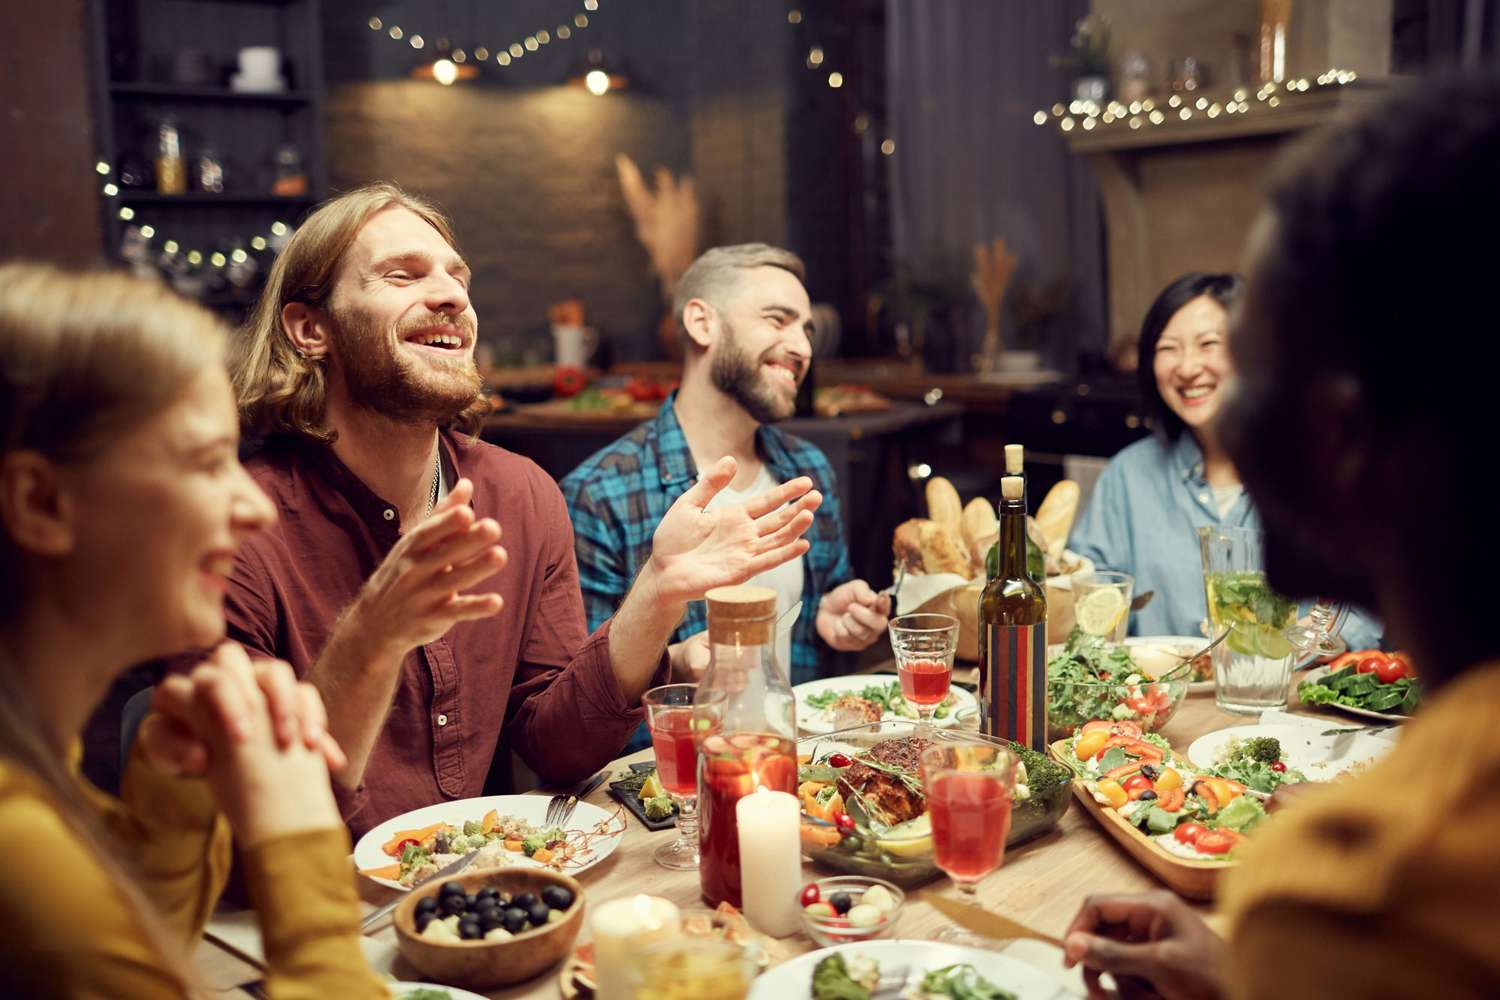 Dinner party scene of people laughing while eating